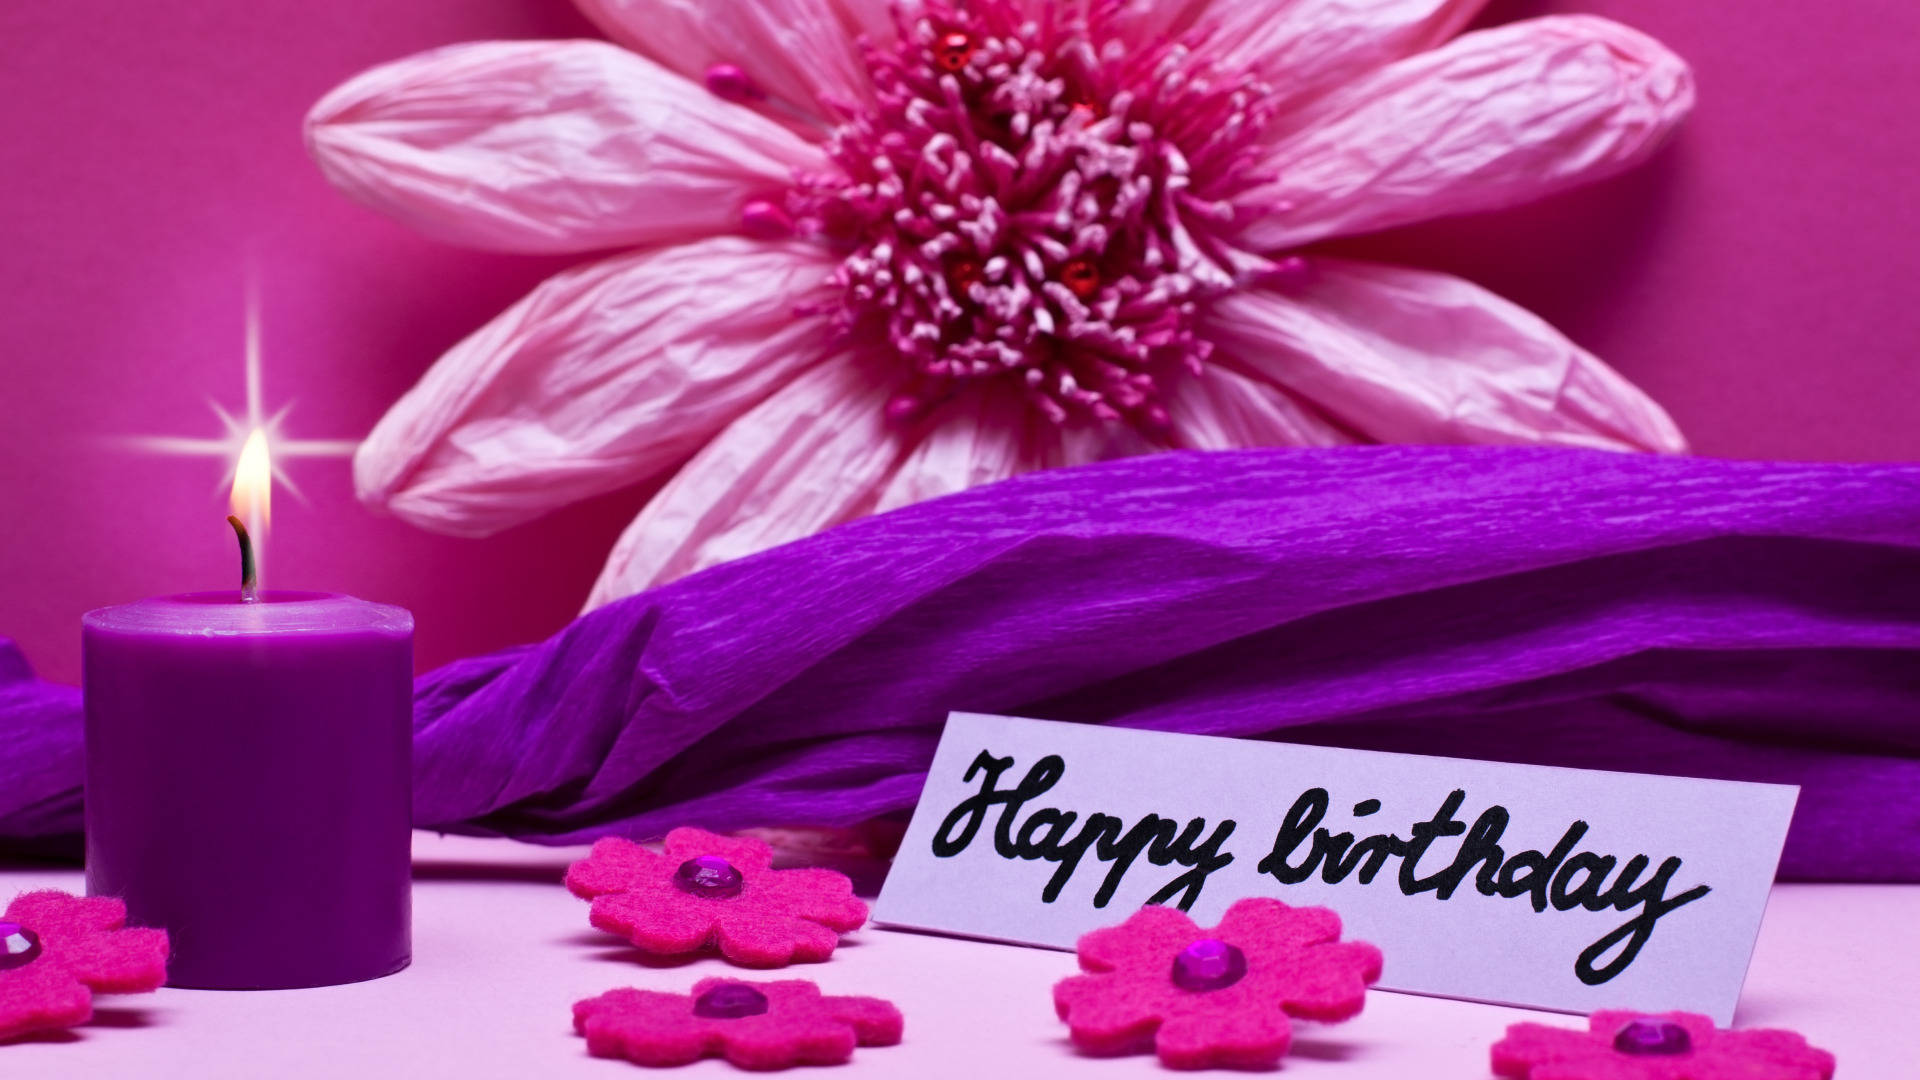 Download Rose And Carnation Happy Birthday Flower Wallpaper